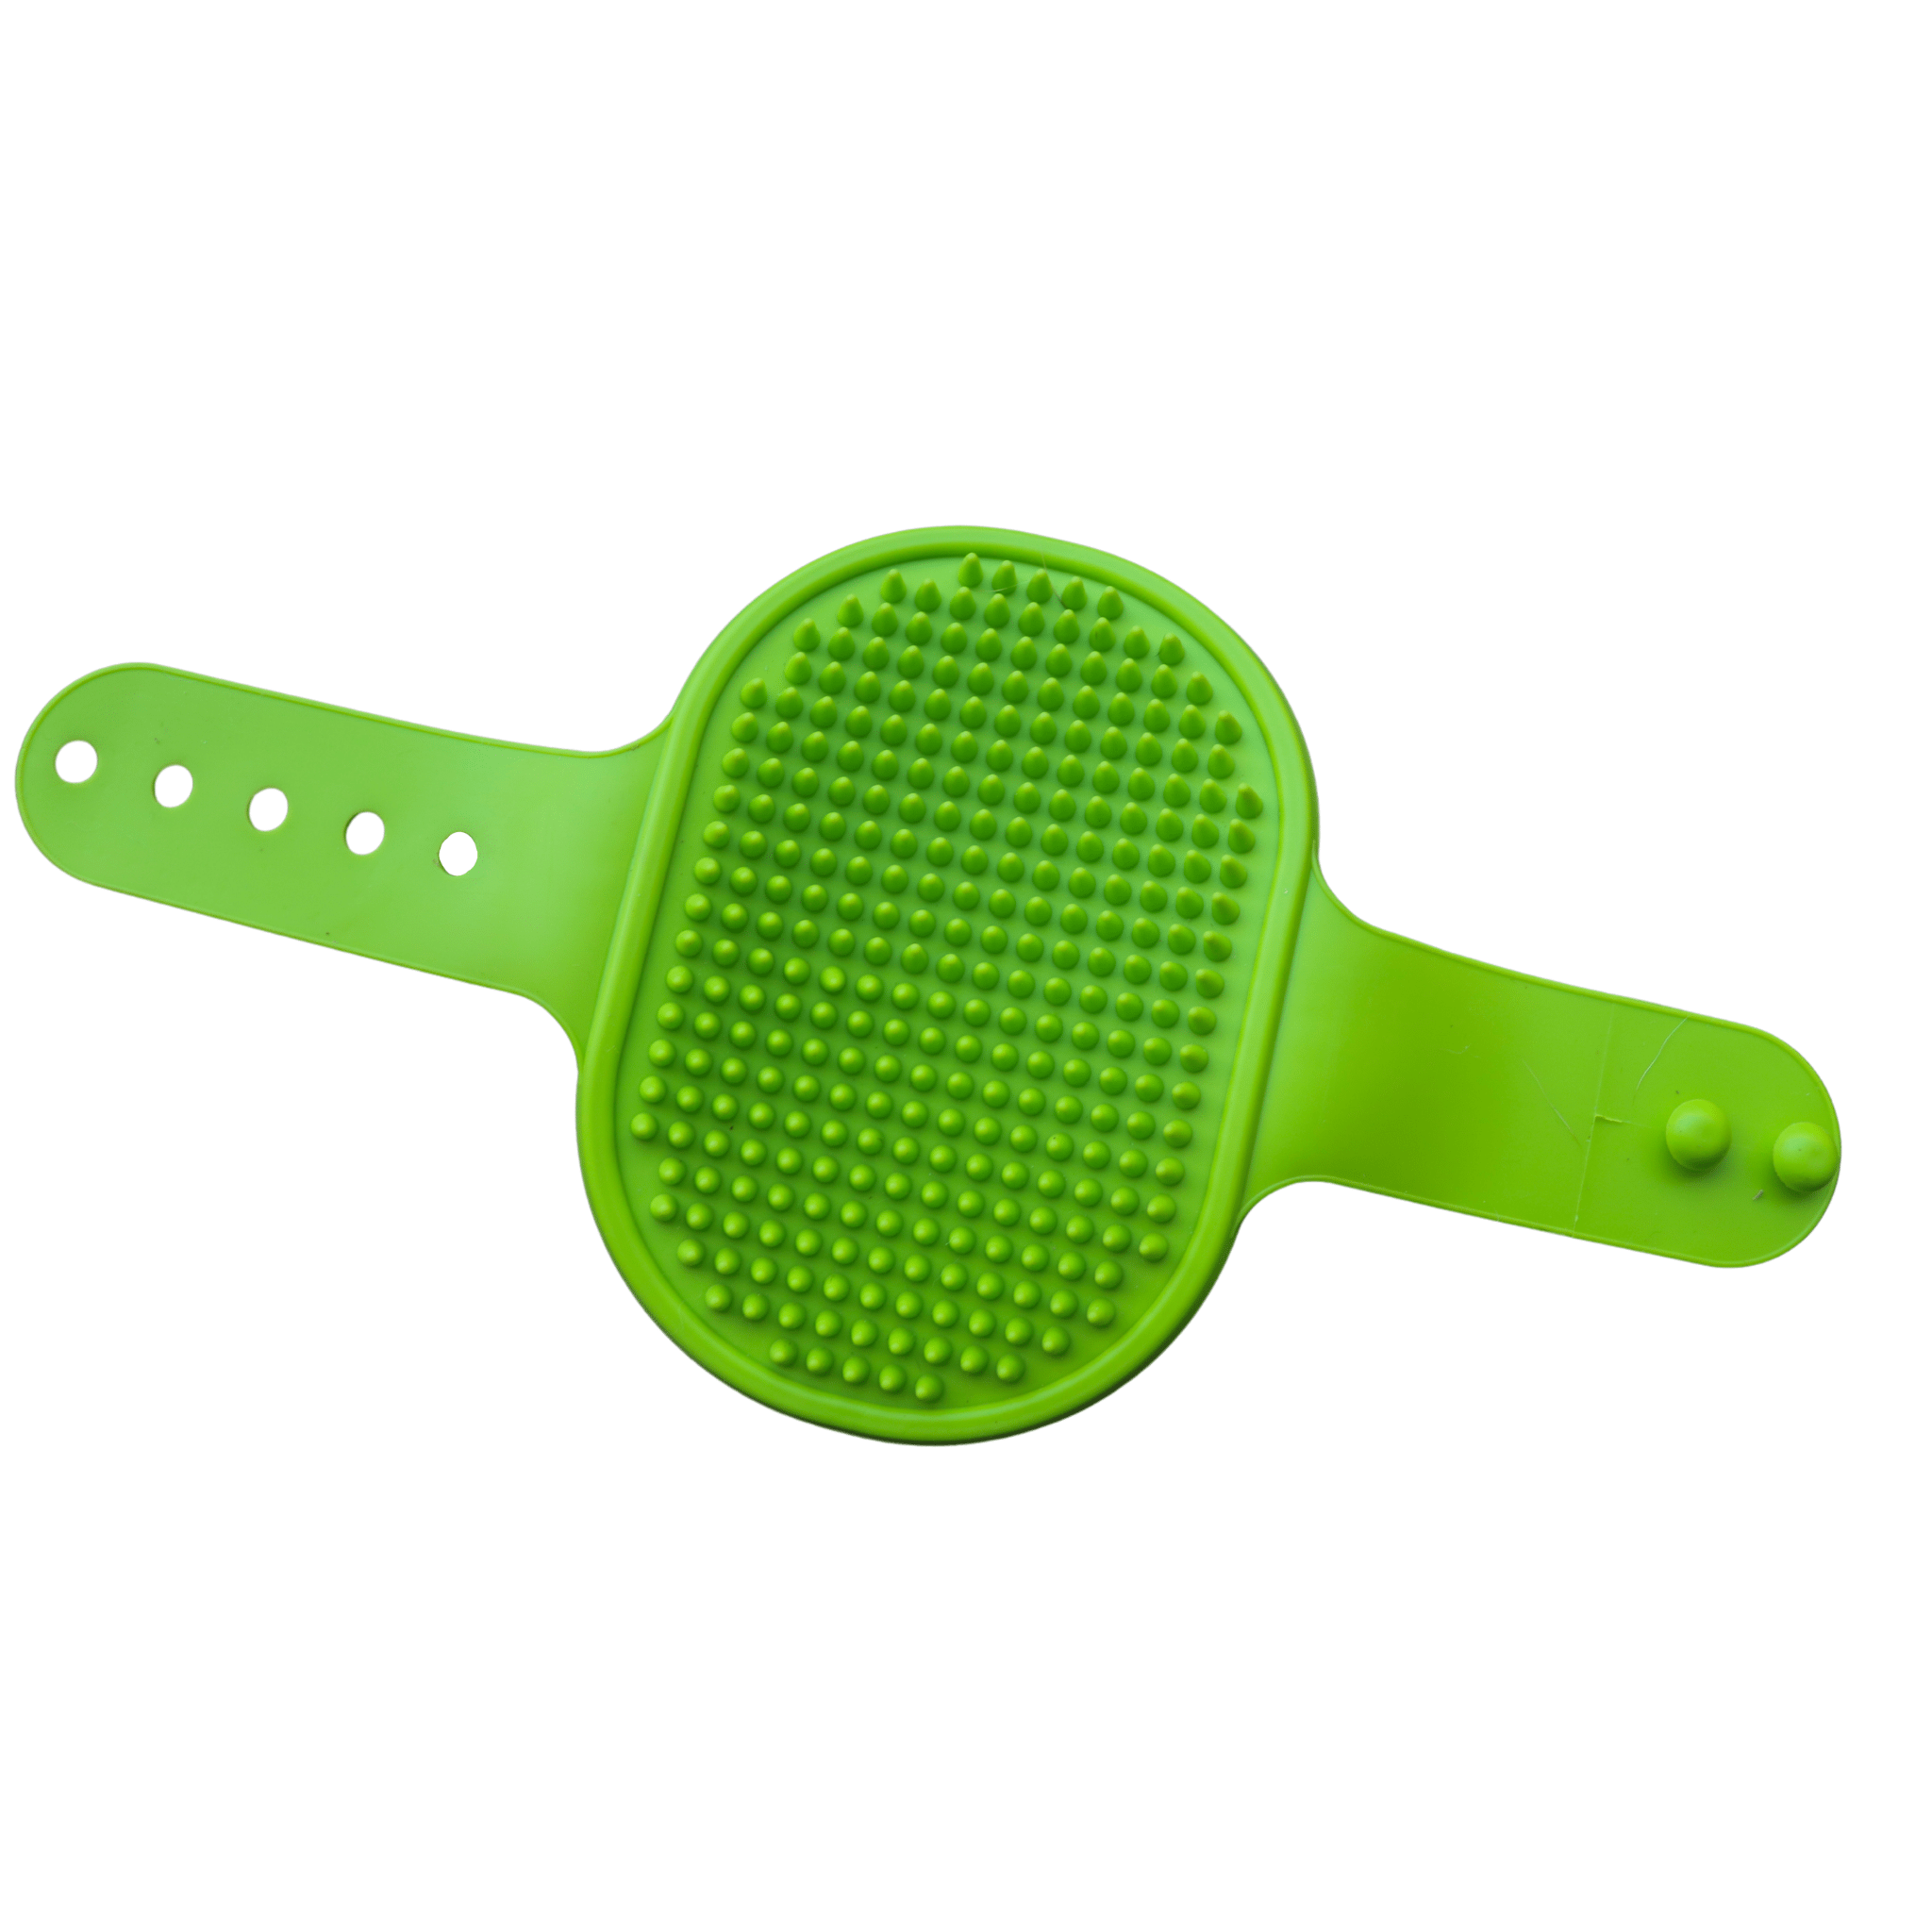 glove brush for dogs